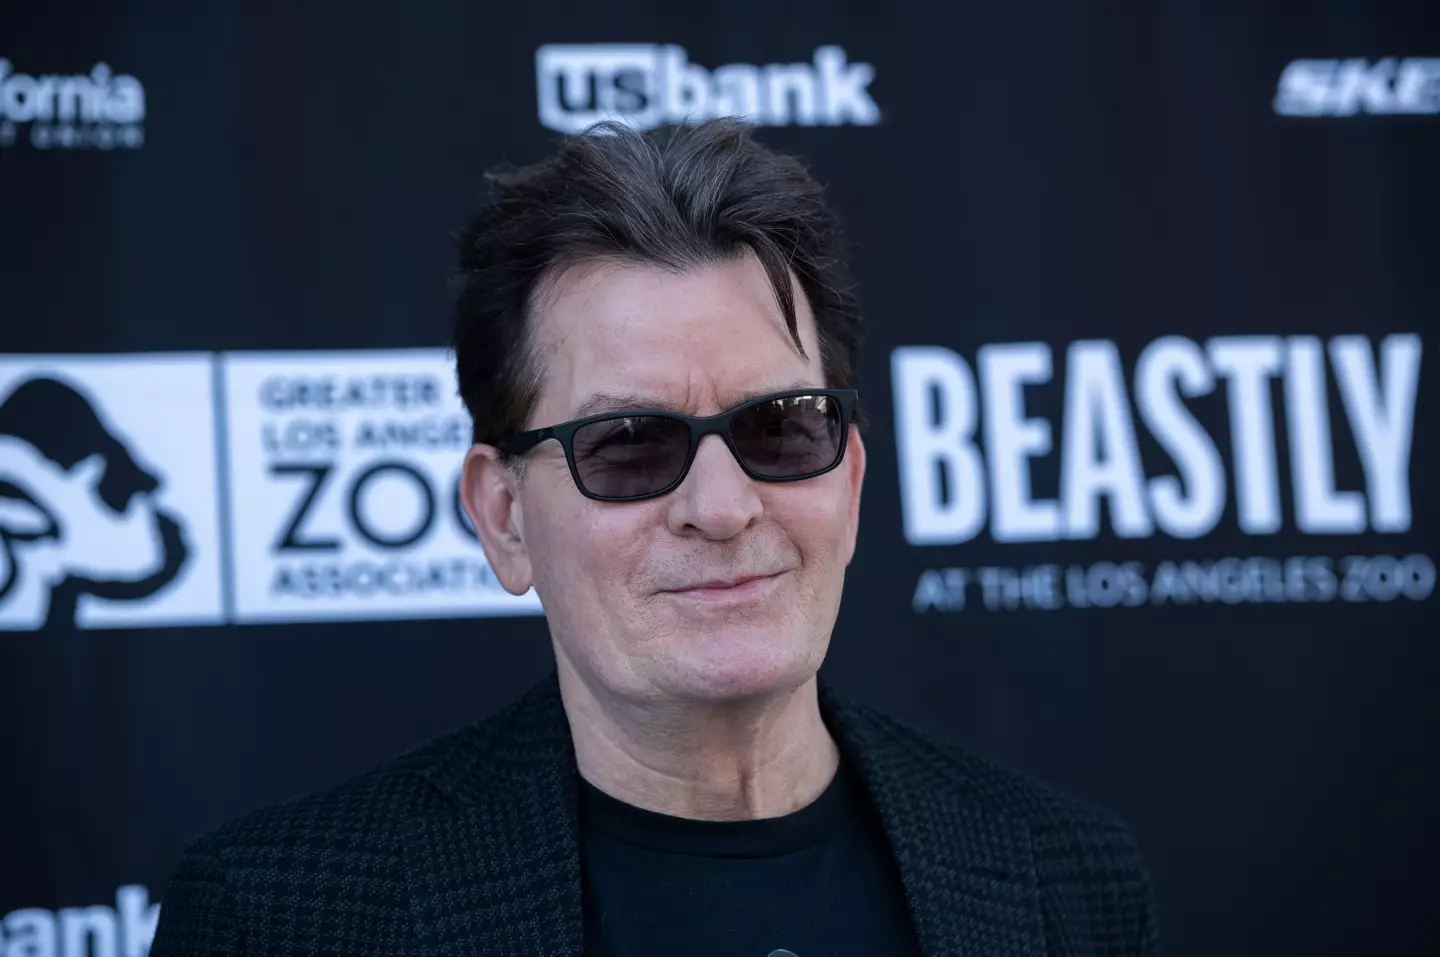 Charlie Sheen's neighbor has been arrested on suspicion of attacking the actor.